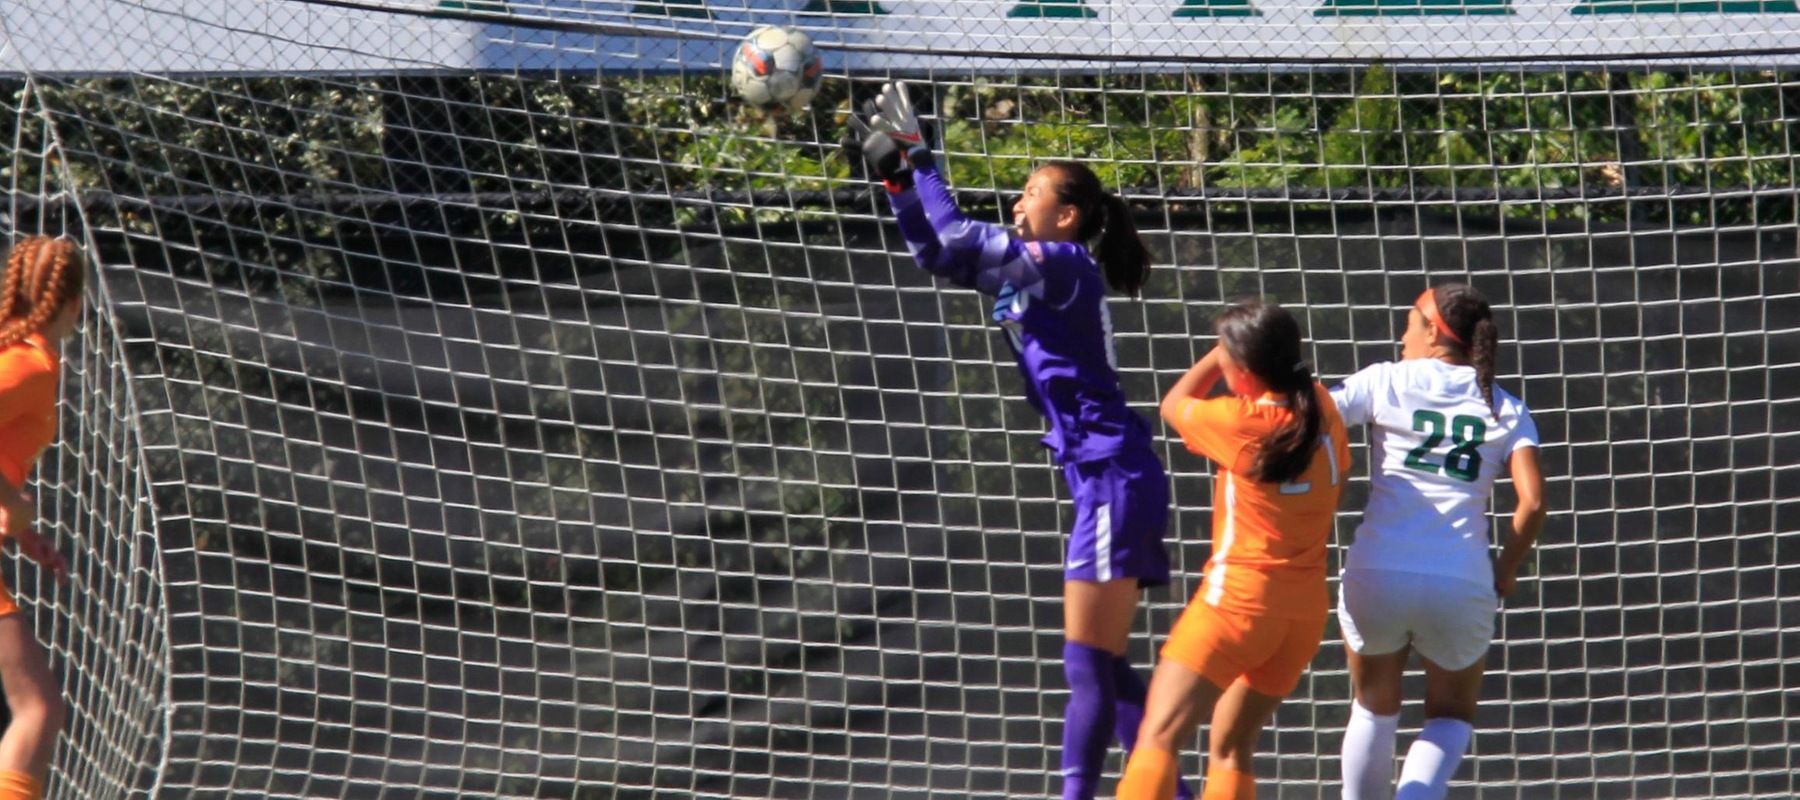 File photo of Mio Nakajima who made four saves in the 0-0 draw at Bloomfield. Wilmington University vs Post University during their NCAA women's soccer match at the Wilmington University sports complex in Newark, Delaware, September 24, 2022. Photo by Tim Shaffer